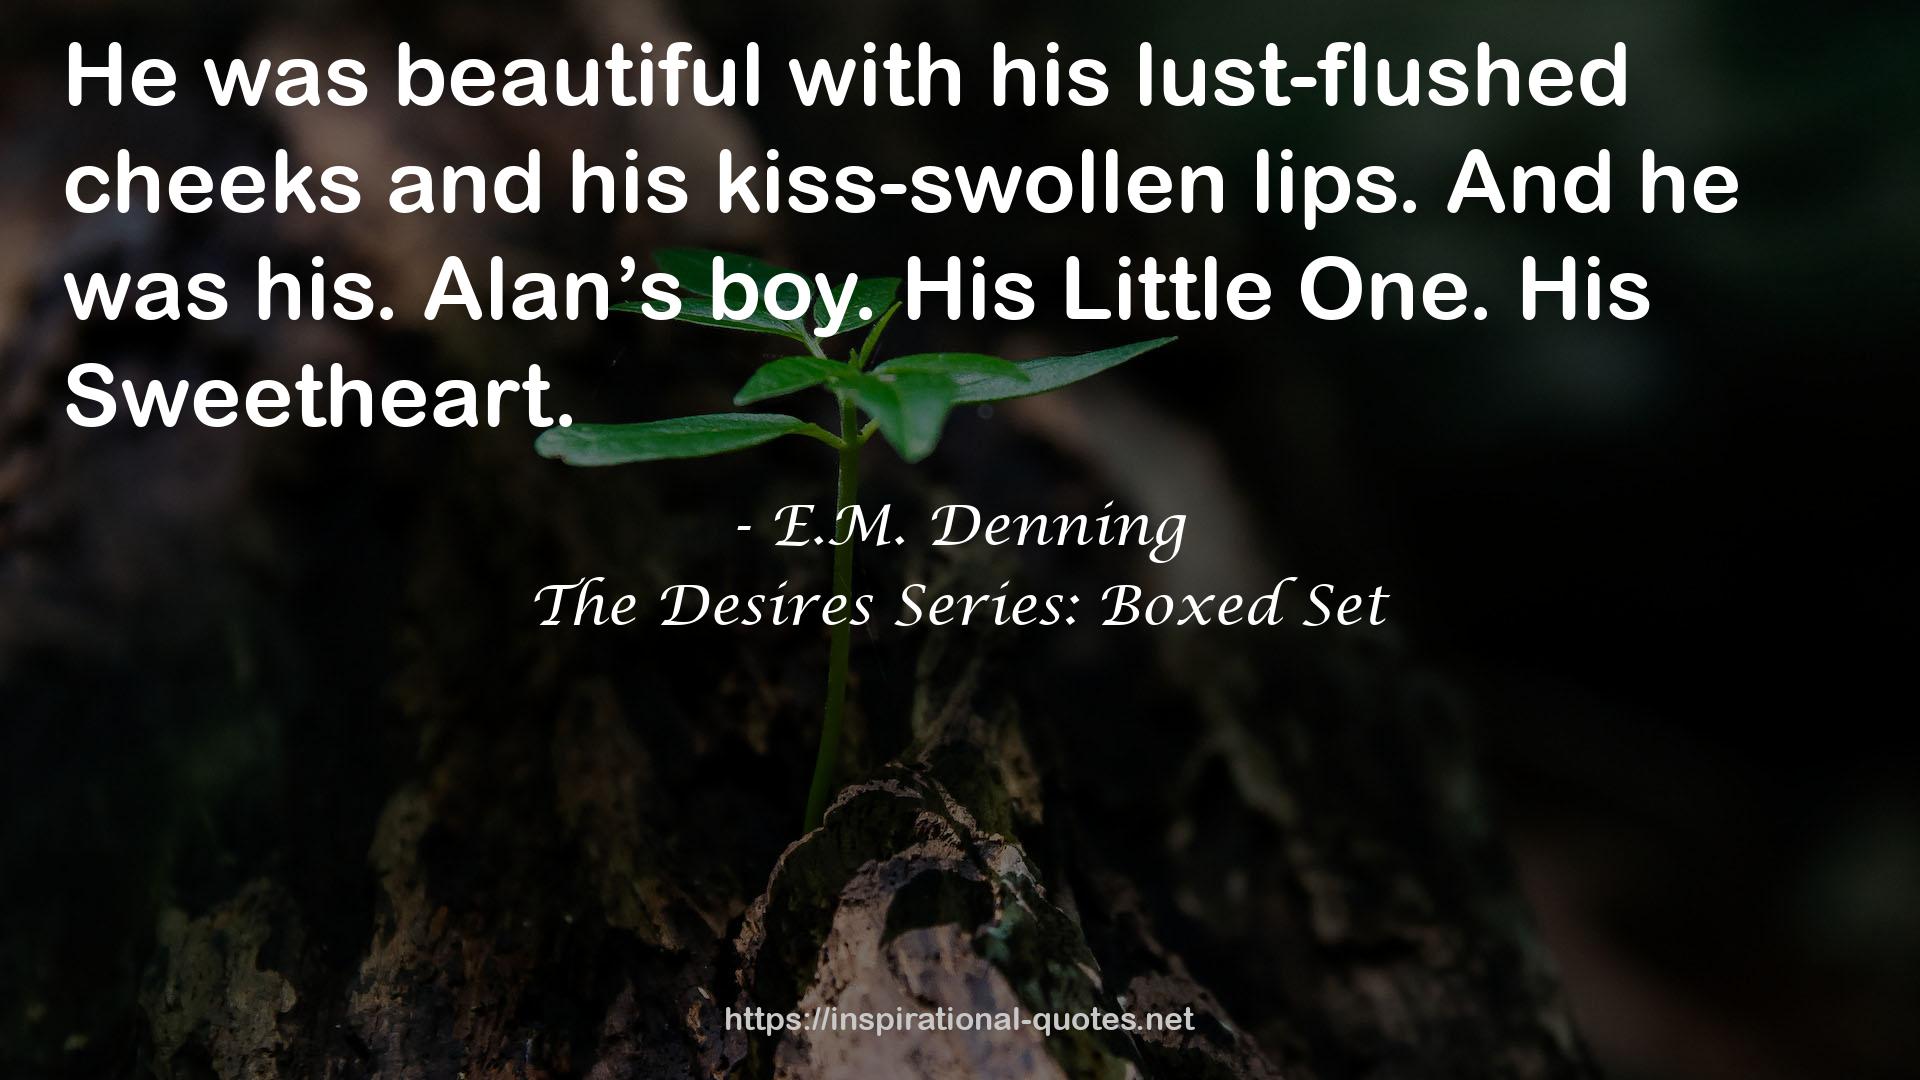 The Desires Series: Boxed Set QUOTES